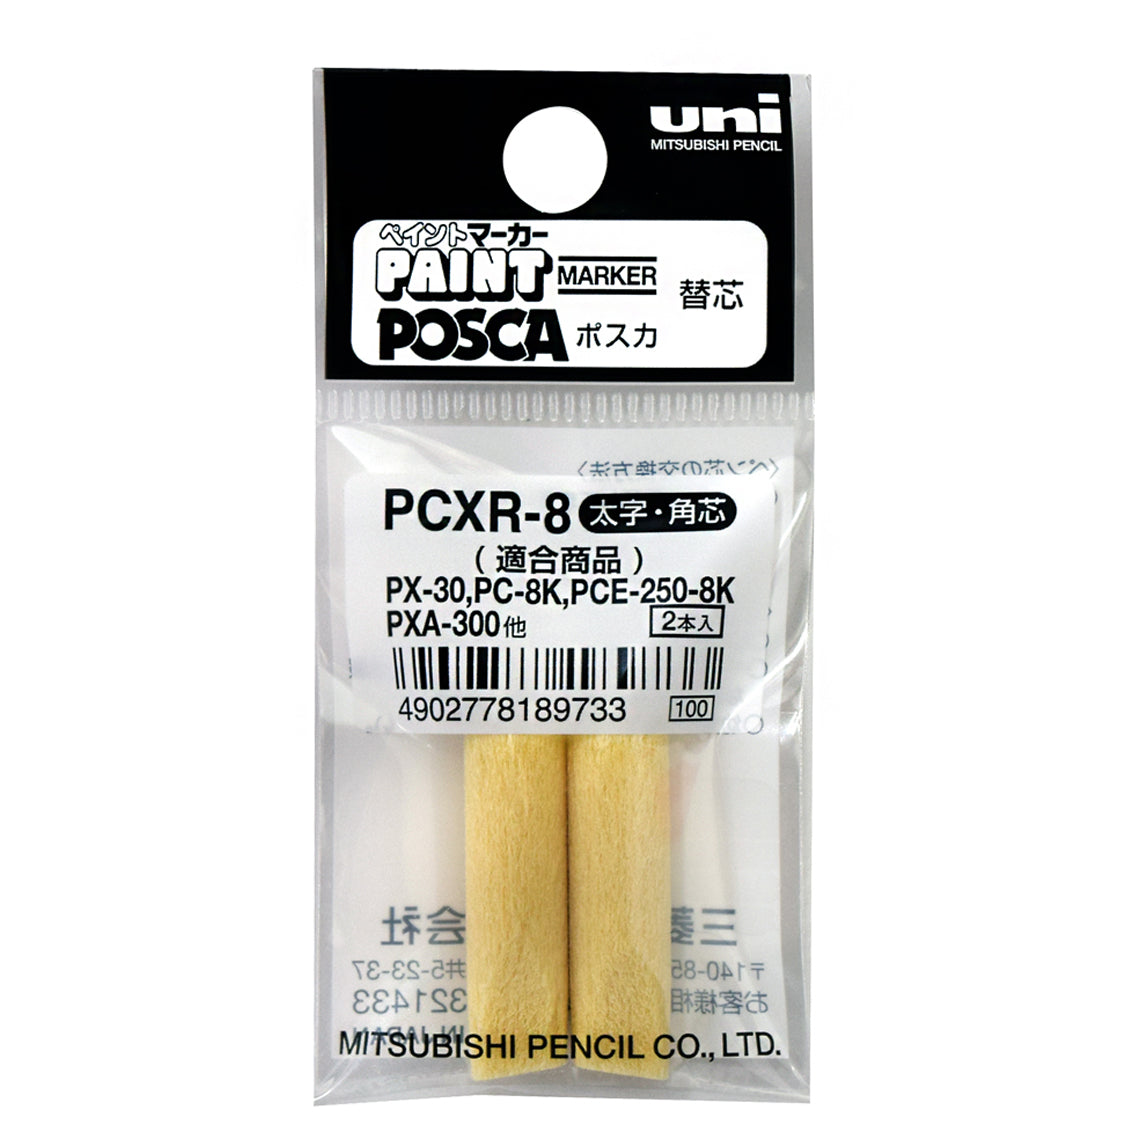 Replacement Tips for Uni Paint PX-30 / Posca PC-8K, Pack of 2 (PCXR-8)